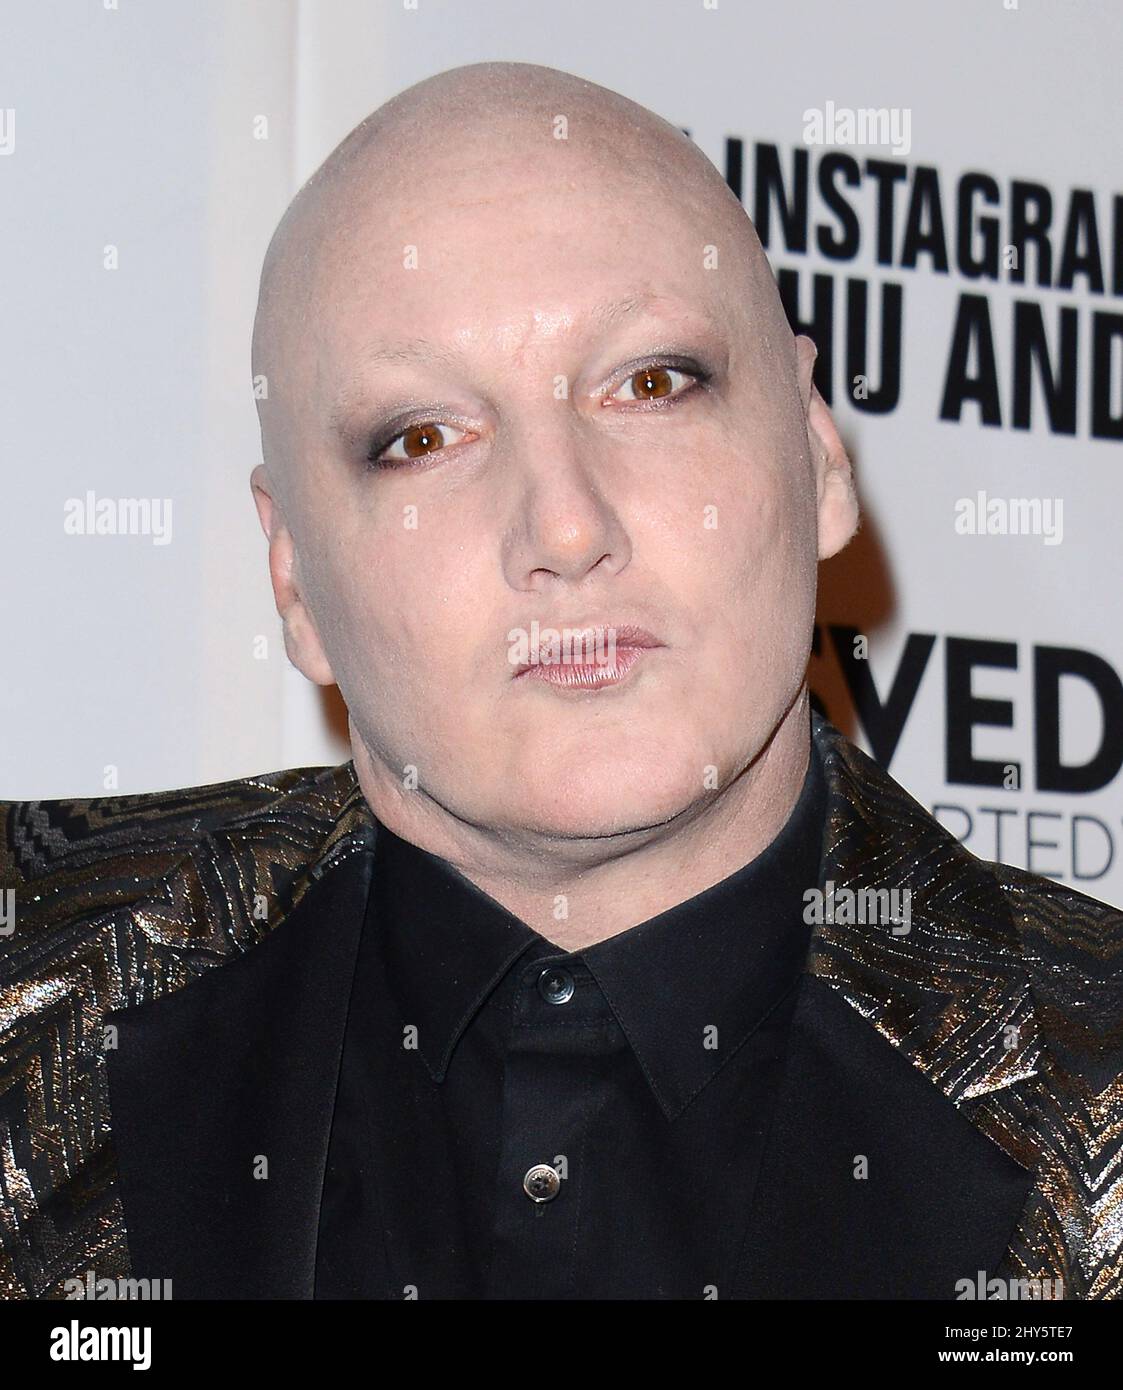 James St. James attending The Instagram Art Of Mathu Andersen Exhibition Opening Party held at World of Wonder Storefront Gallery Stock Photo